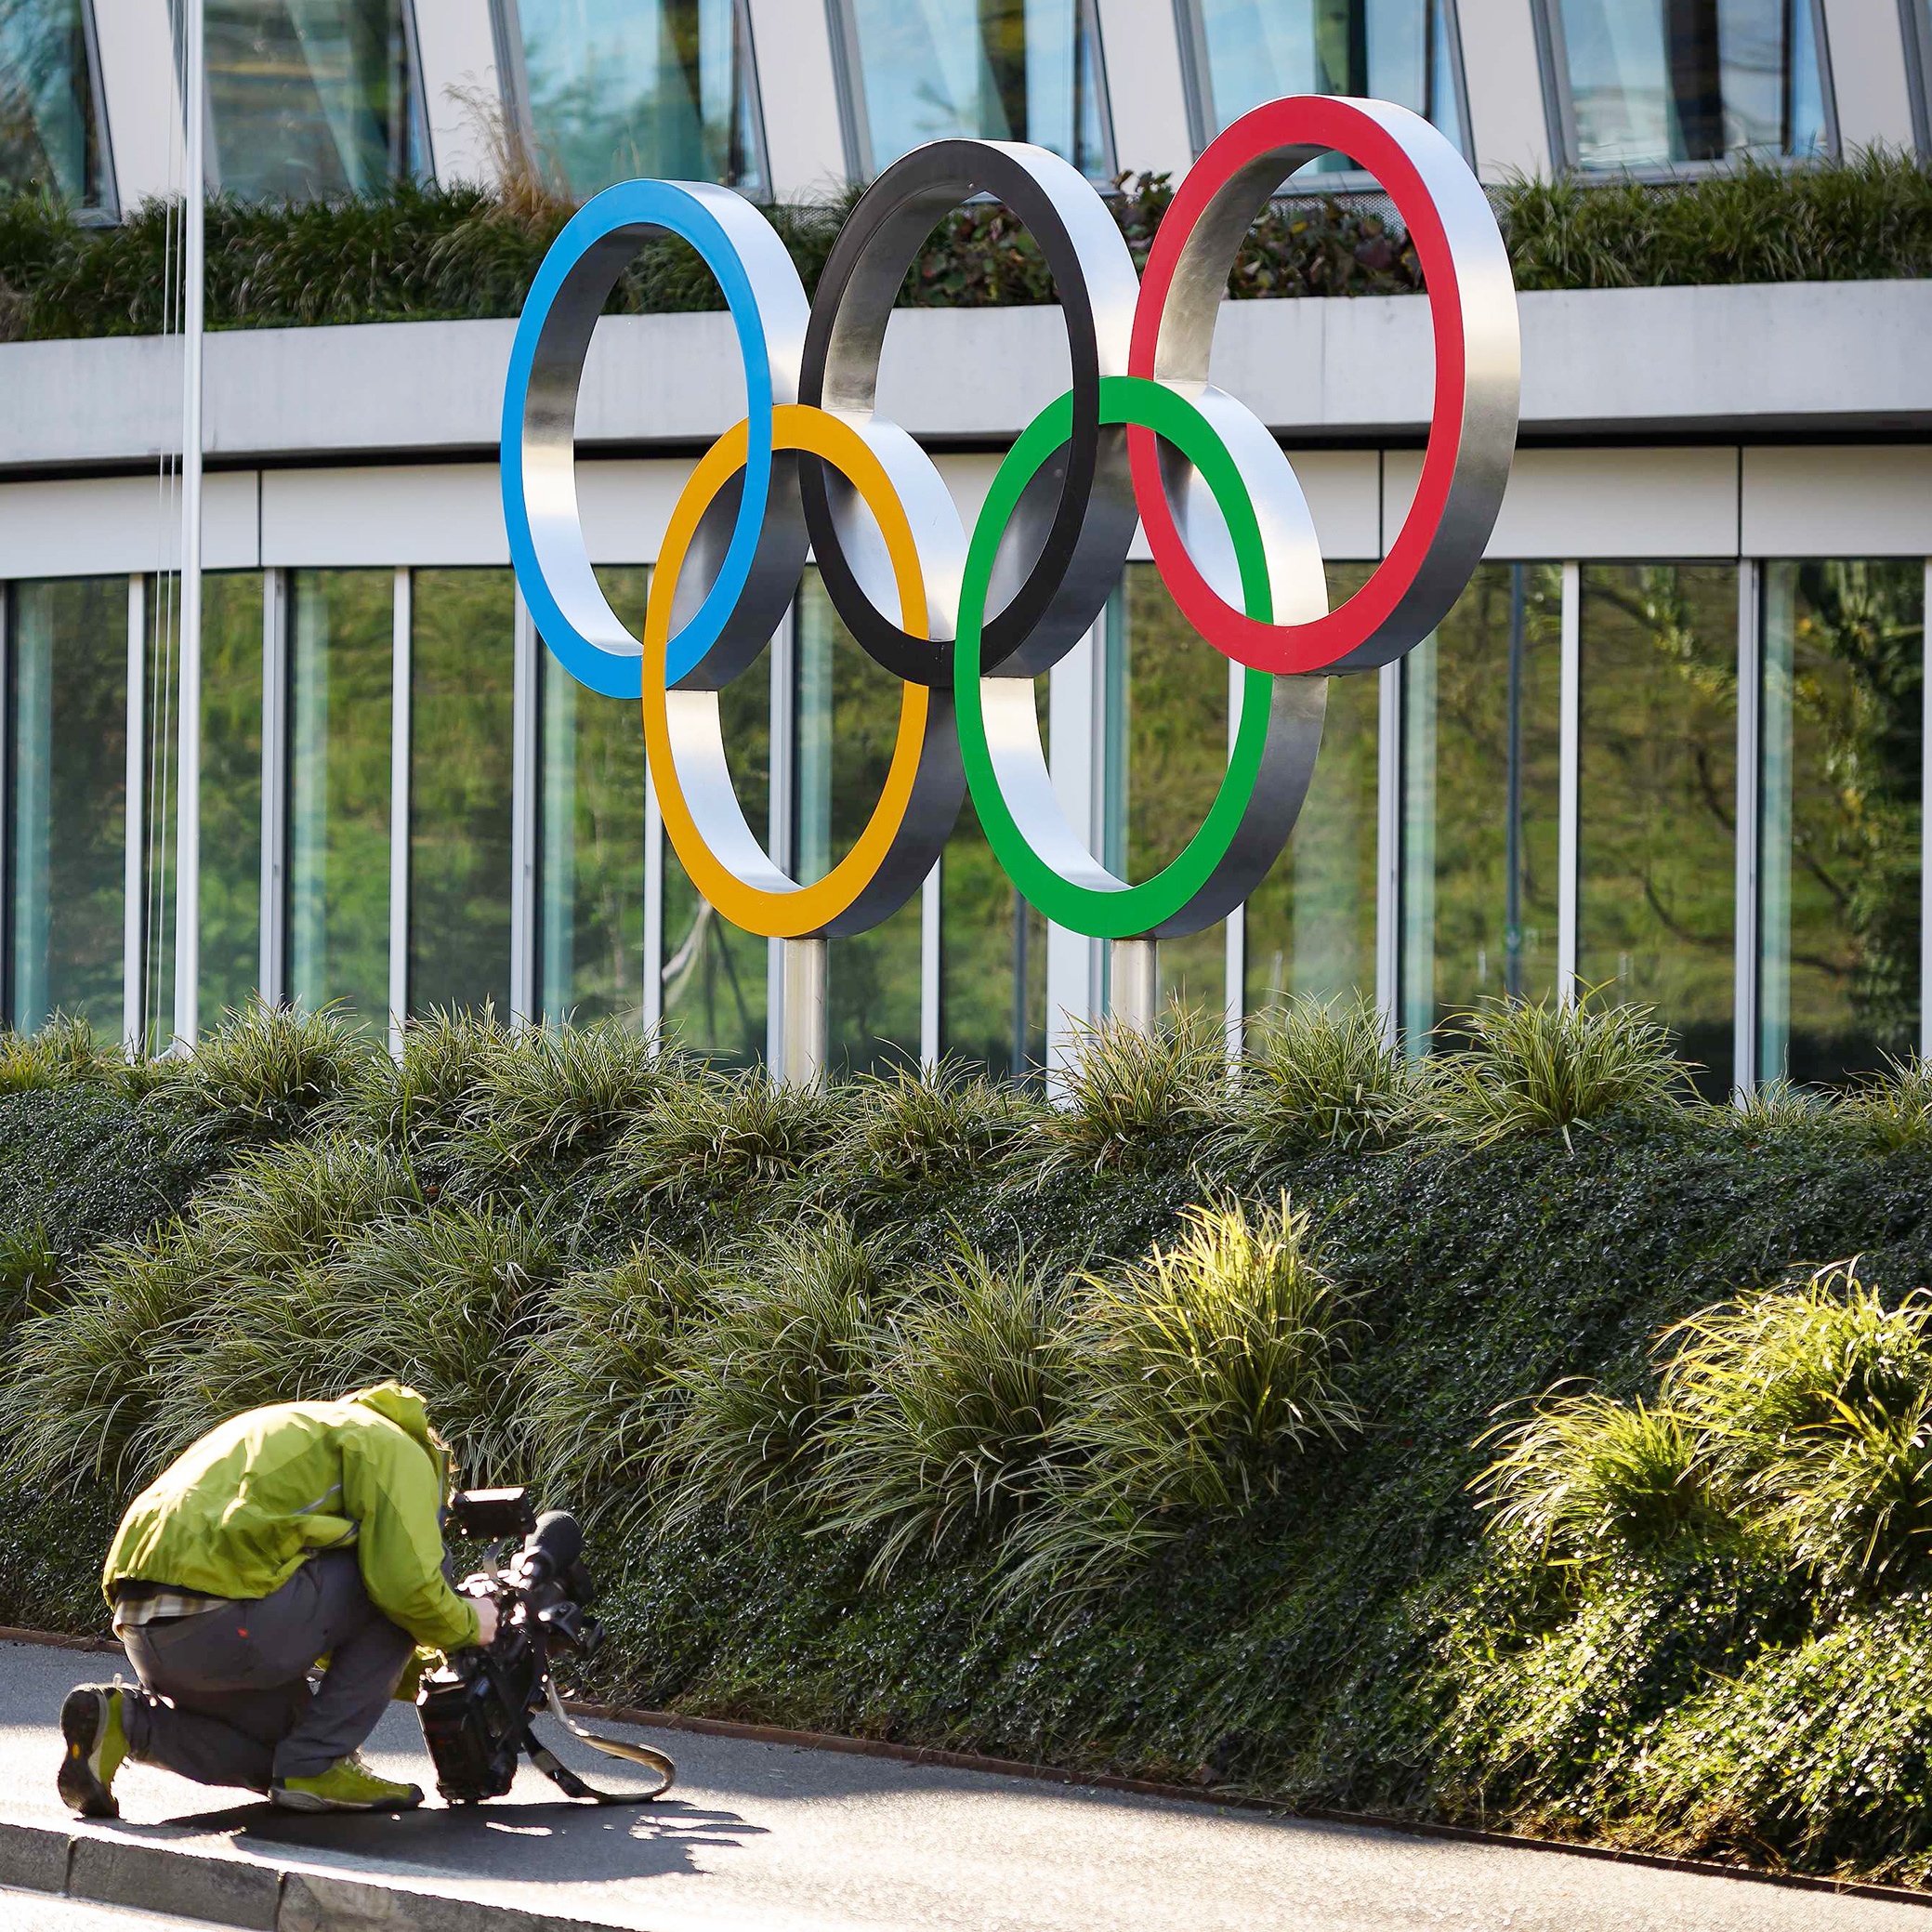 A cameraman films the Olympic Rings at the International Olympic Committee (IOC) headquarters in Lausanne on March 3, 2020. - The COVID-19 which has already killed more than 3000 people in the World will be at the center of a meeting of the International Olympic Committee (IOC) on March 3 and 4, 2020 in Lausanne less than five months before the opening ceremony of the Olympics in Tokyo. (Photo by Fabrice COFFRINI / AFP)